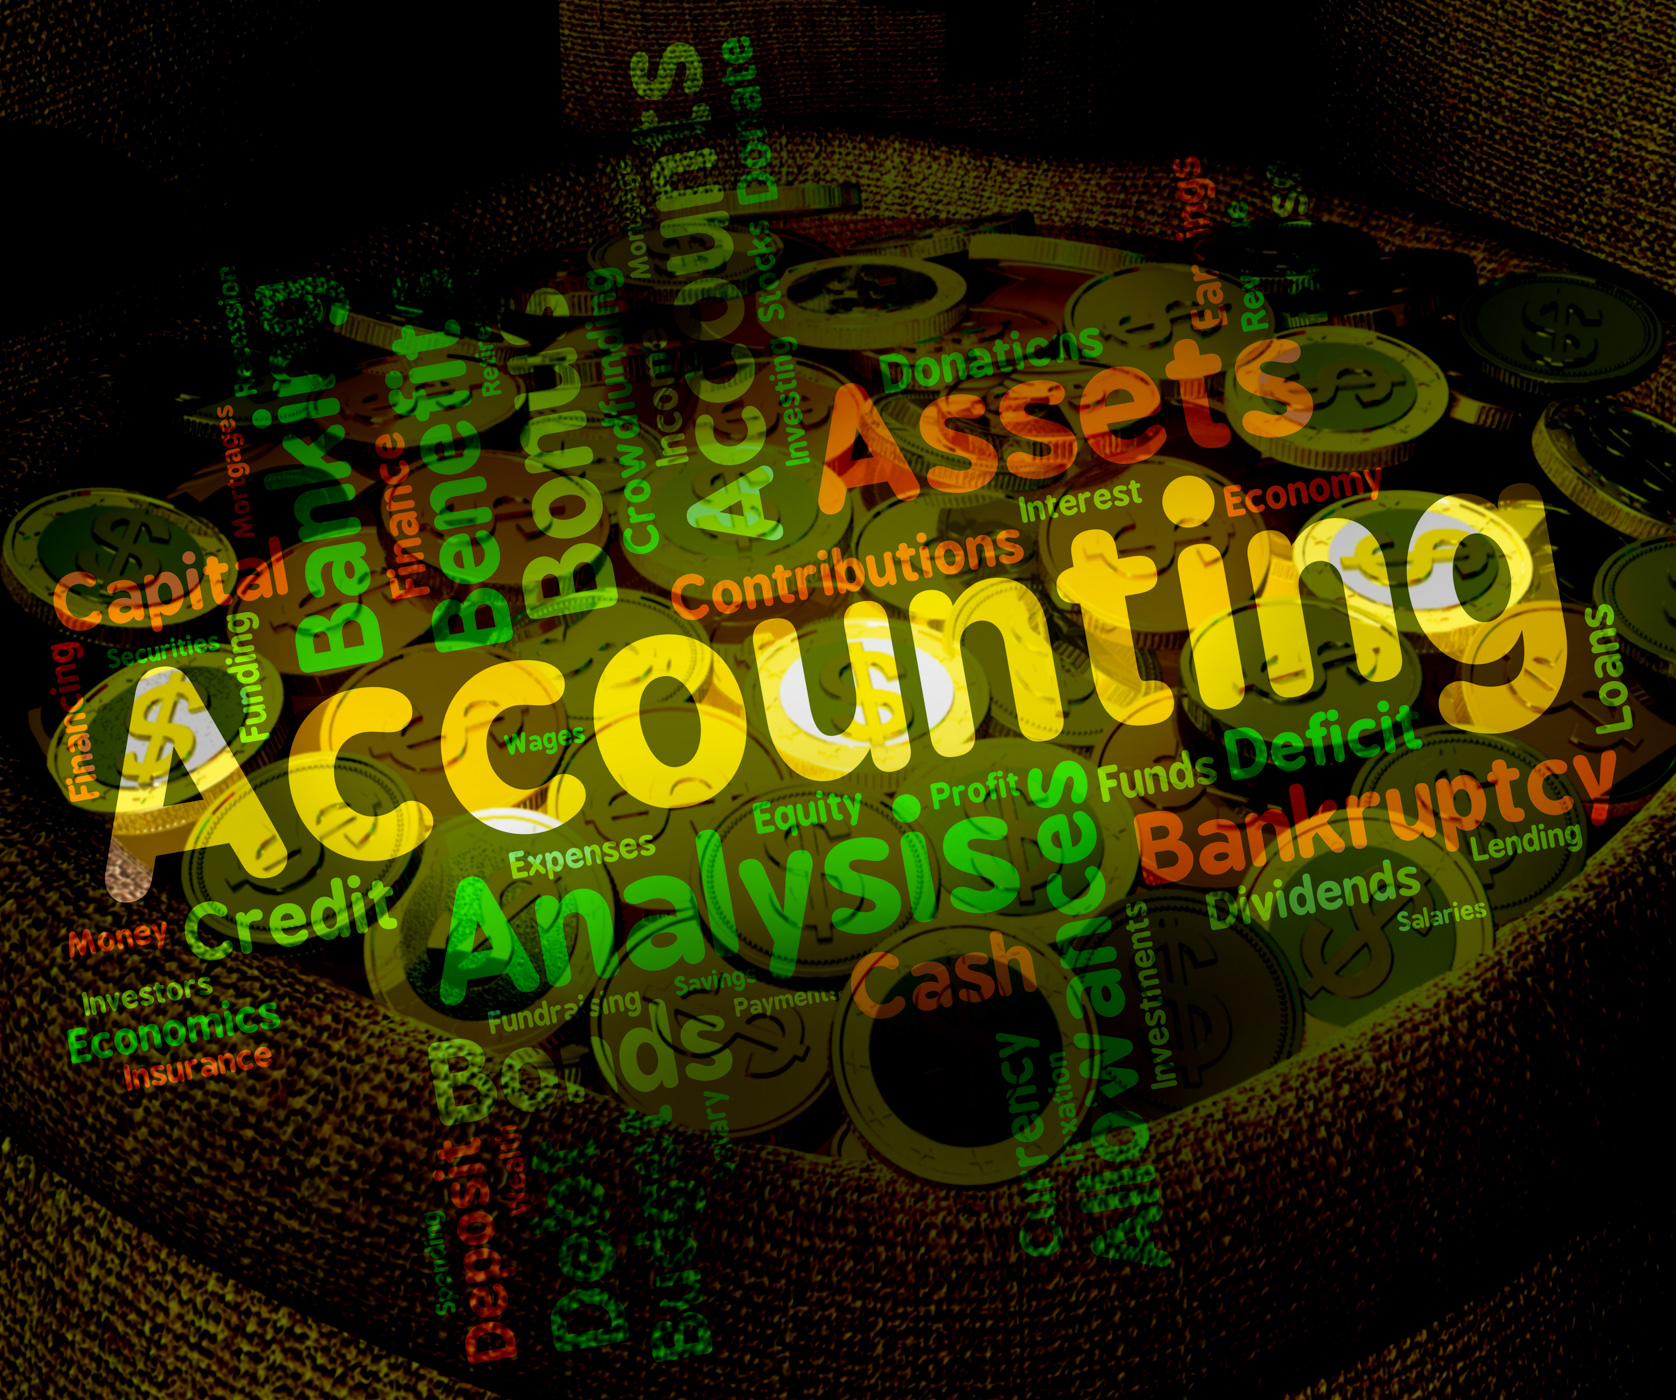 Accounting words represents balancing the books and accountant photo